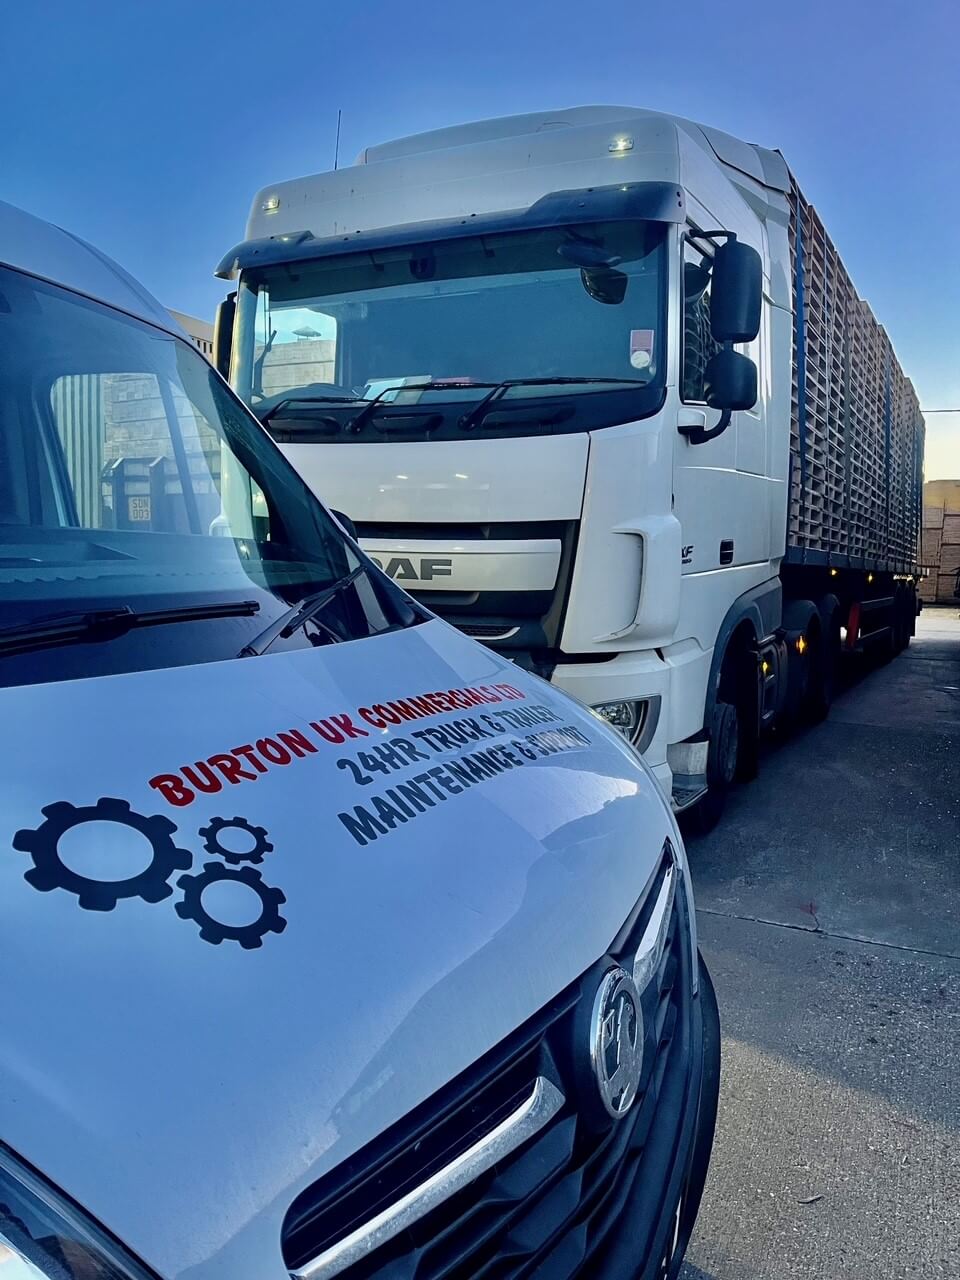 burton commercials HGV repair van on site with a whit lorry in the background